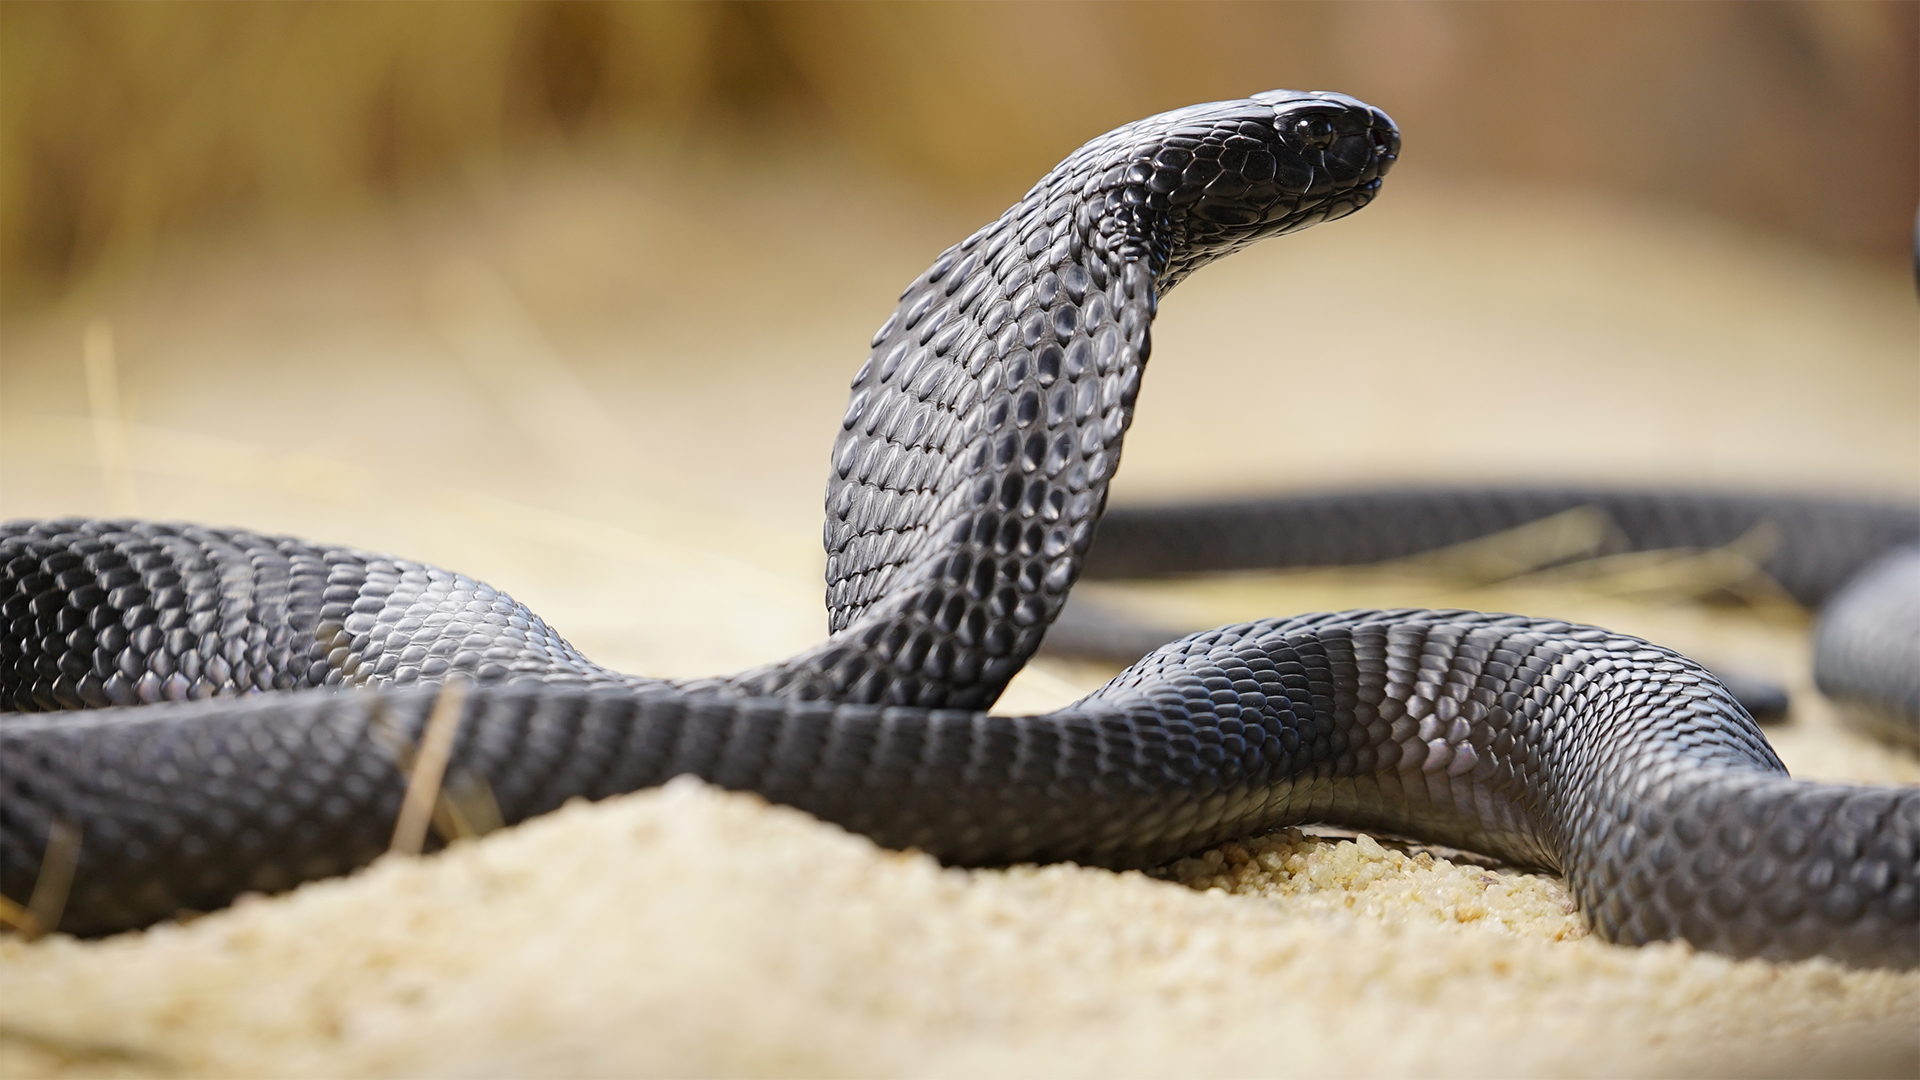 A black spitting cobra (Naja nigricincta woodi). This is from World's Deadliest Snakes. [Photo of the day - May 2022]